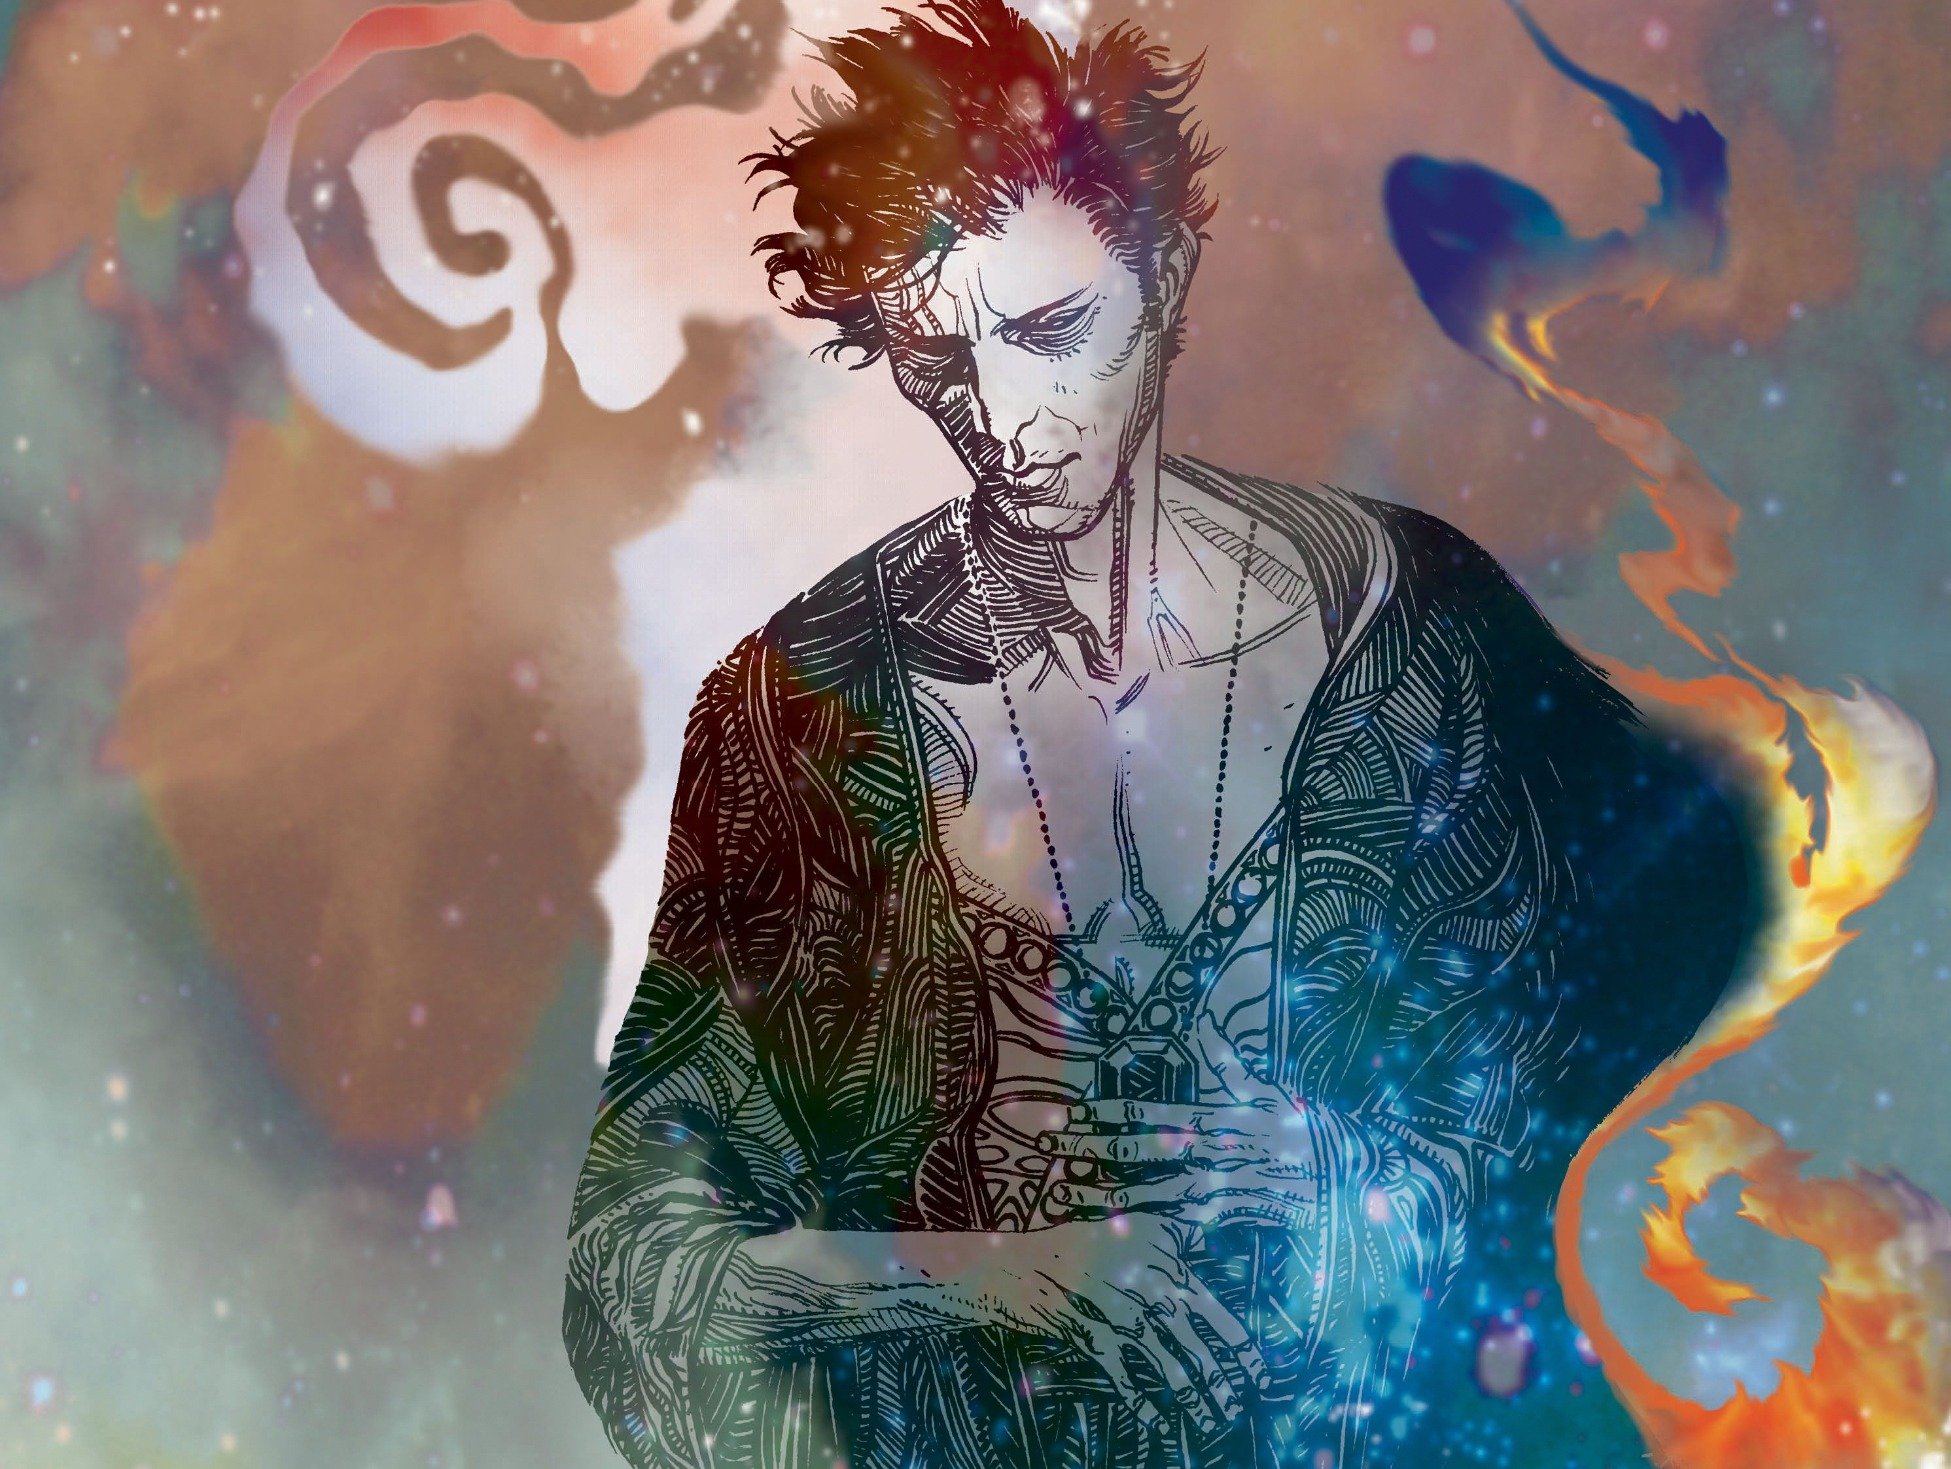 Artwork from DC Comics' 'The Sandman' series by Neil Gaiman, which is being adapted by Netflix. The image shows a man wearing a robe with a blue and pink swirled background.